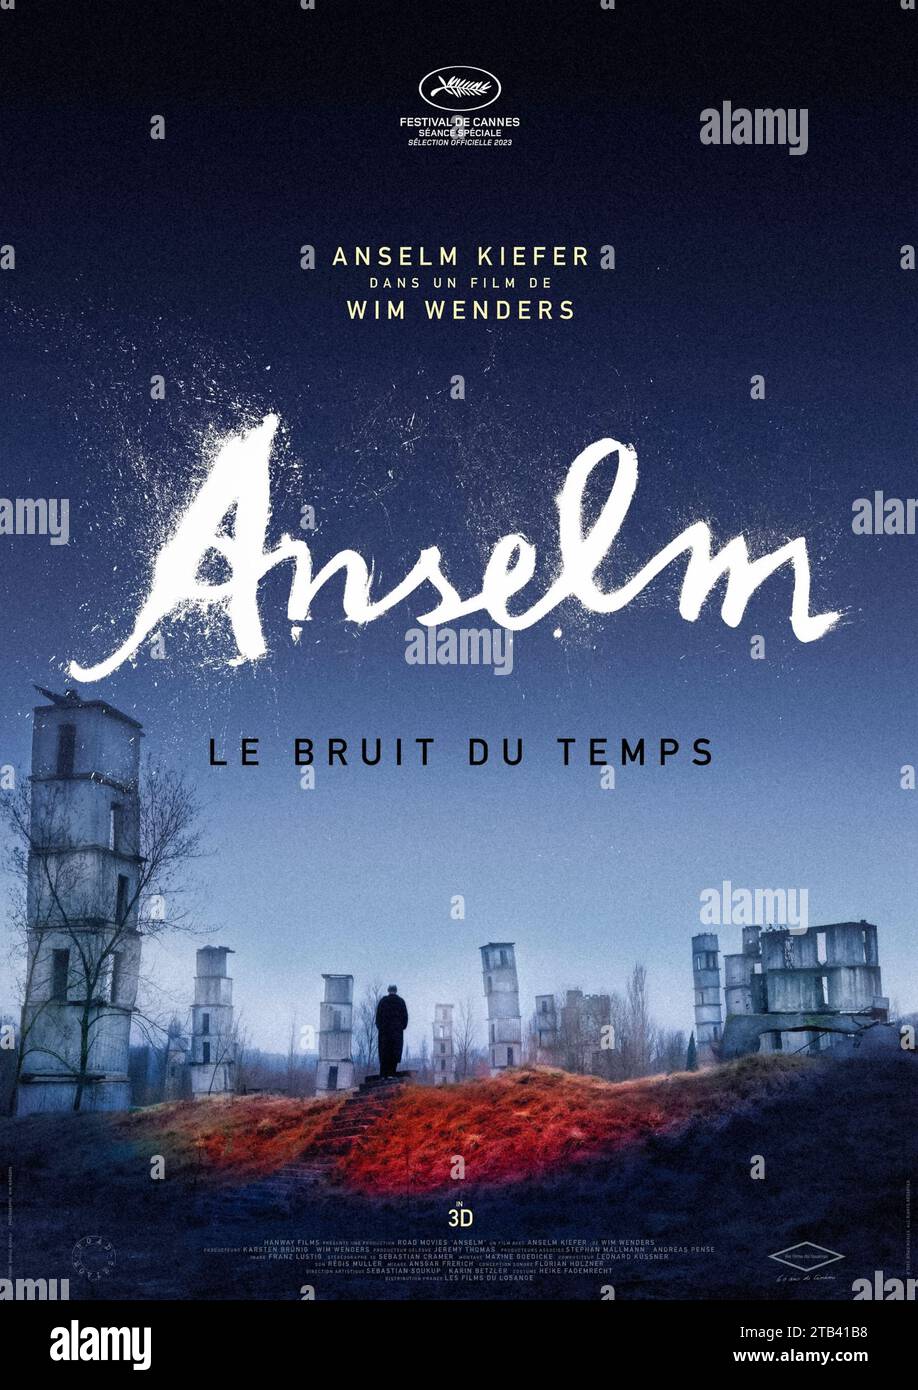 Anselm [Anselm - Das Rauschen der Zeit] (2023) directed by Wim Wenders and starring Anselm Kiefer, Daniel Kiefer and Anton Wenders. Anselm Kiefer is one of the greatest contemporary artists. His past and present diffuse the line between film and painting, thus giving a unique cinematic experience that dives deep into an artist's work and reveals his life path.French poster***EDITORIAL USE ONLY***. Credit: BFA / Les Films du Losange Stock Photo